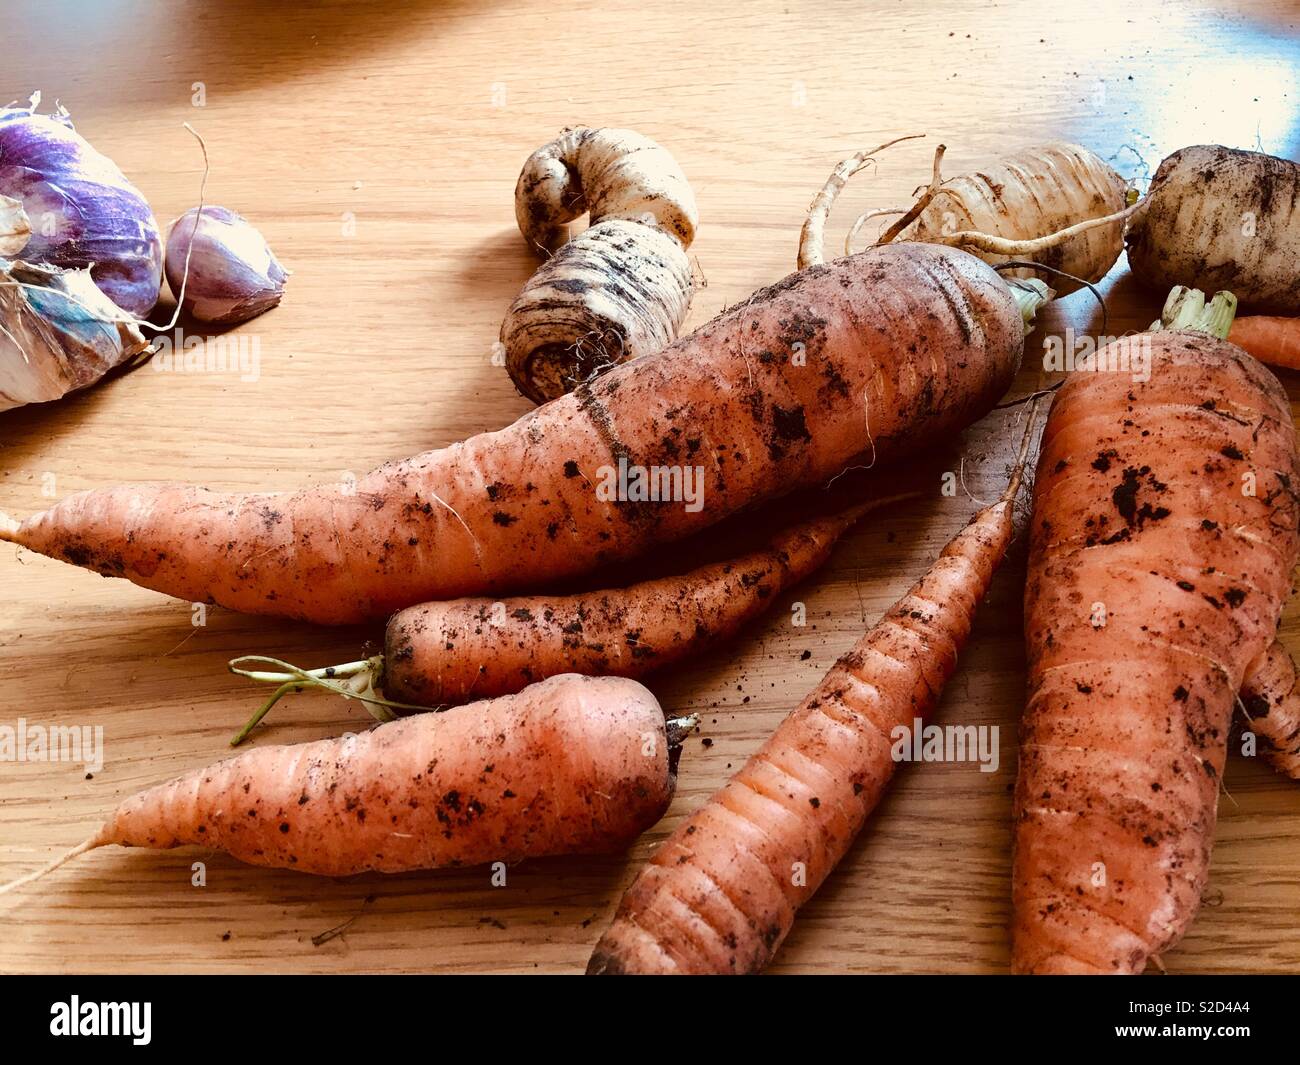 Home grown, freshly picked vegetables including organic carrots, parsnips and French garlic Stock Photo